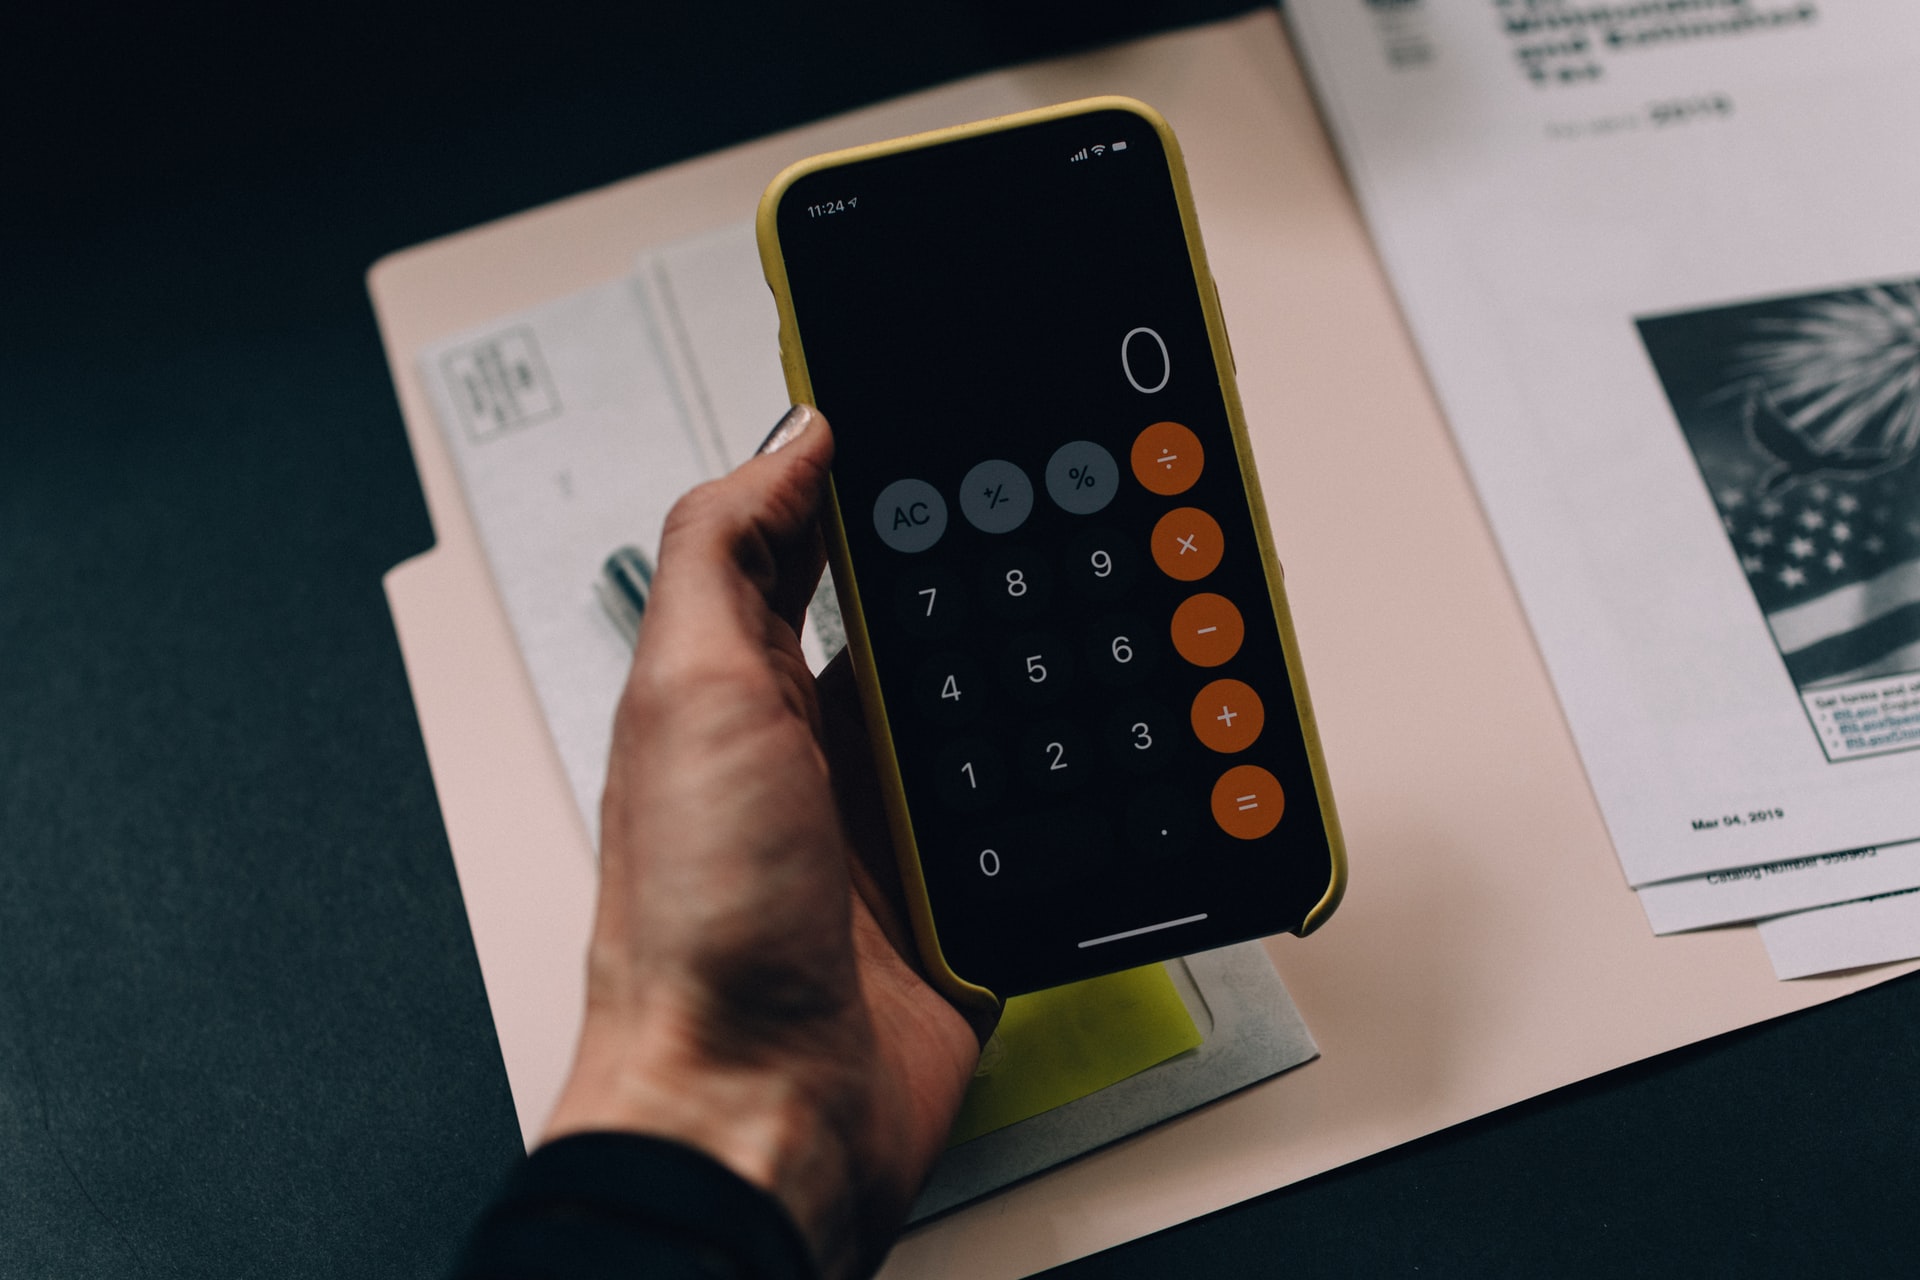 You can set up alarms to manage your account and save money! Source: Unsplash